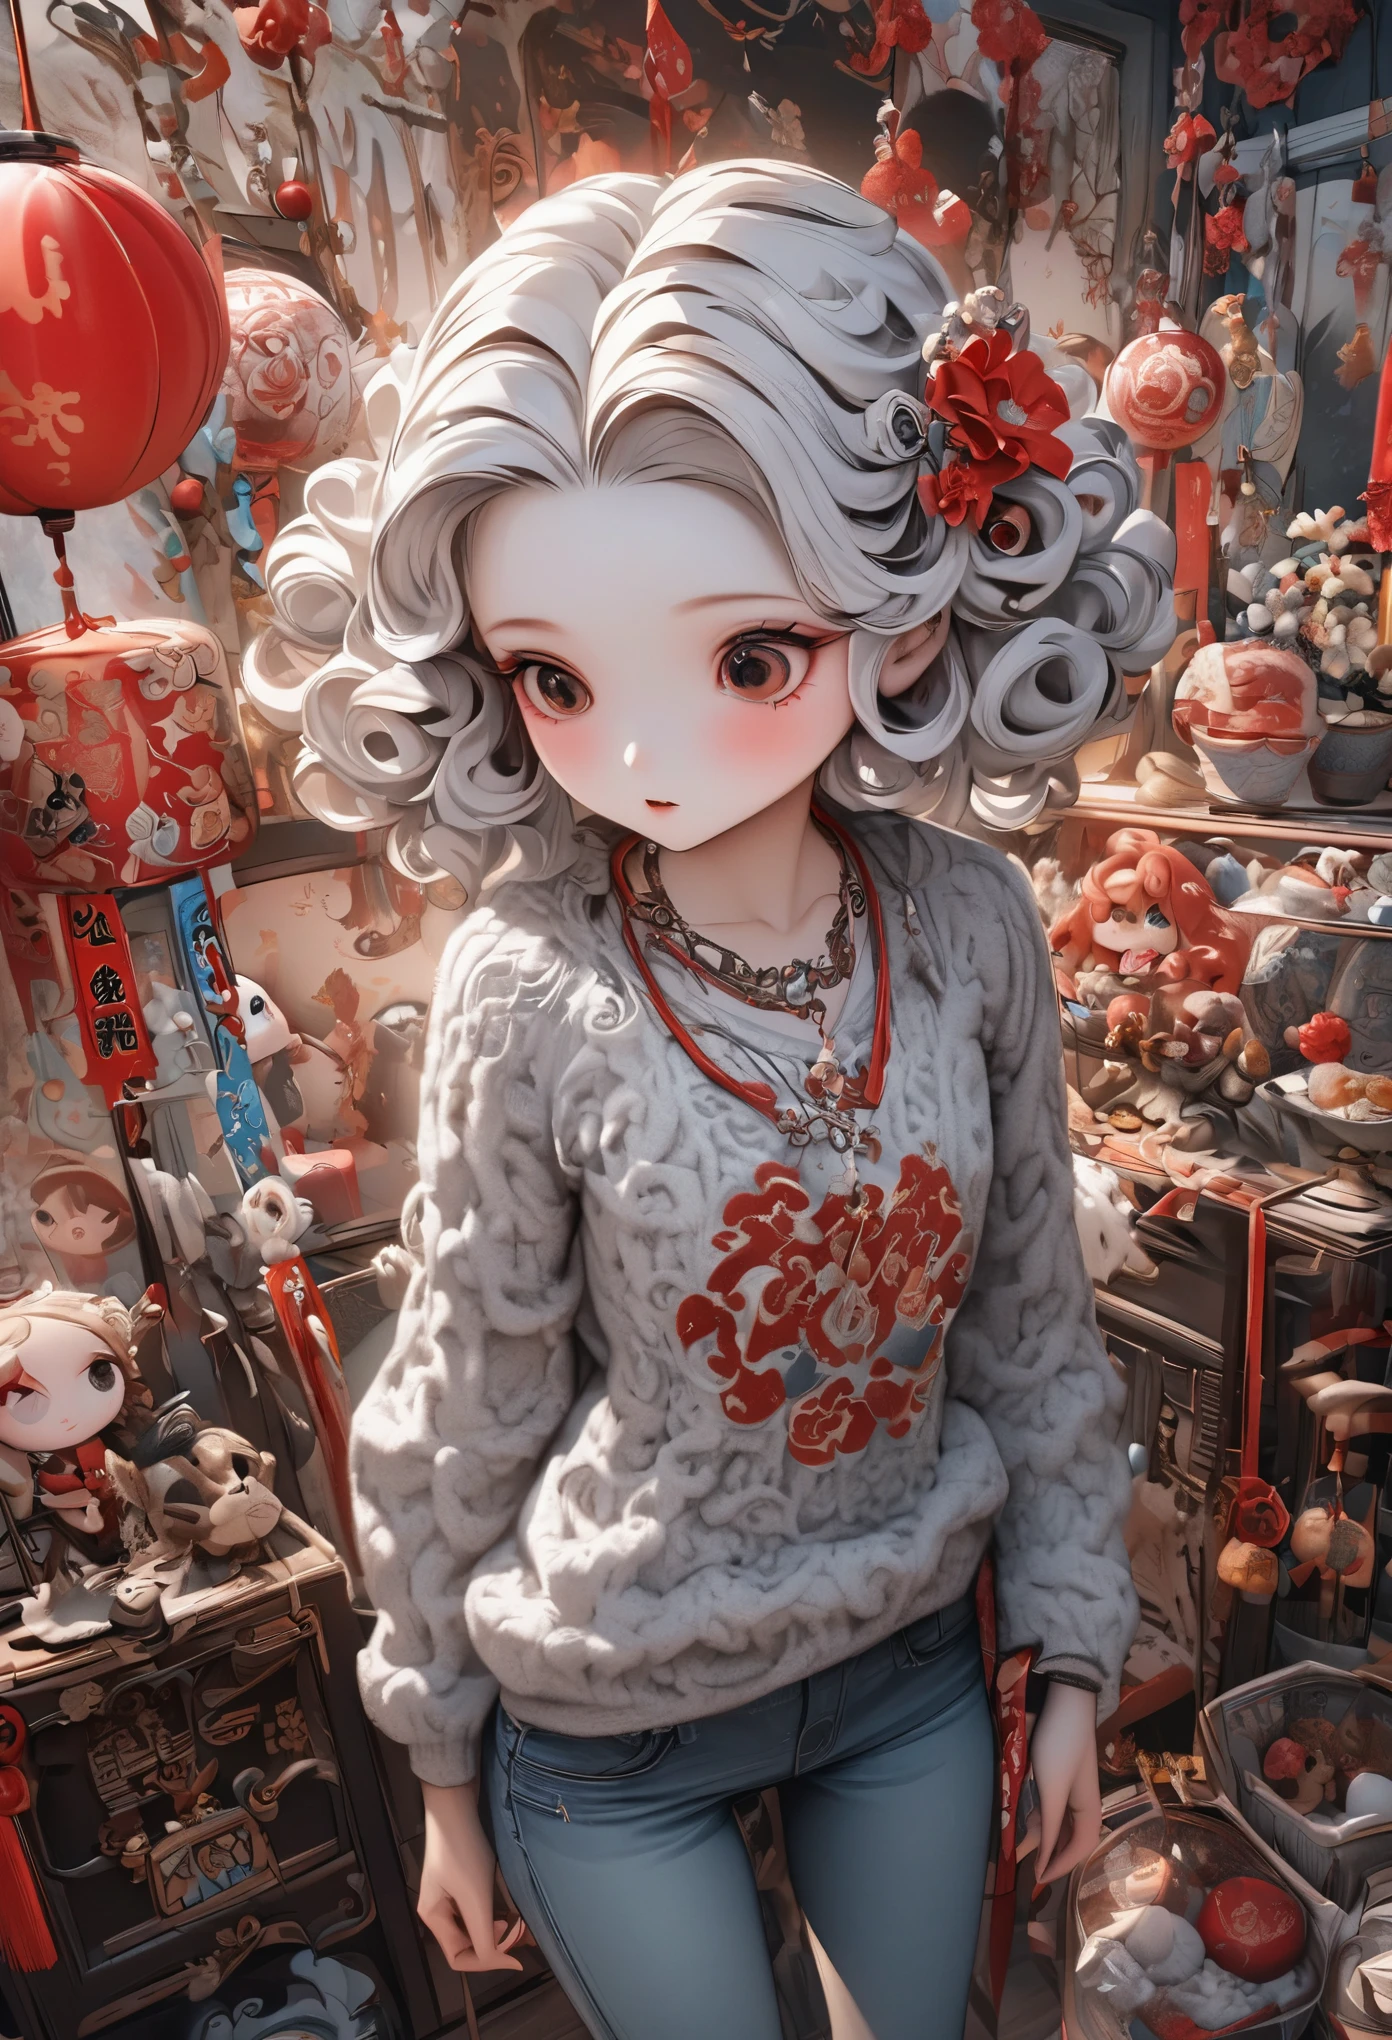 （（（hair accessories）））,necklace,Put on a sexy sweater,,skinny jeans,The room is filled with Chinese New Year decorations.super wide angle（（（masterpiece）））, （（best quality））,（（Intricate details））,（（surreal））（8K）